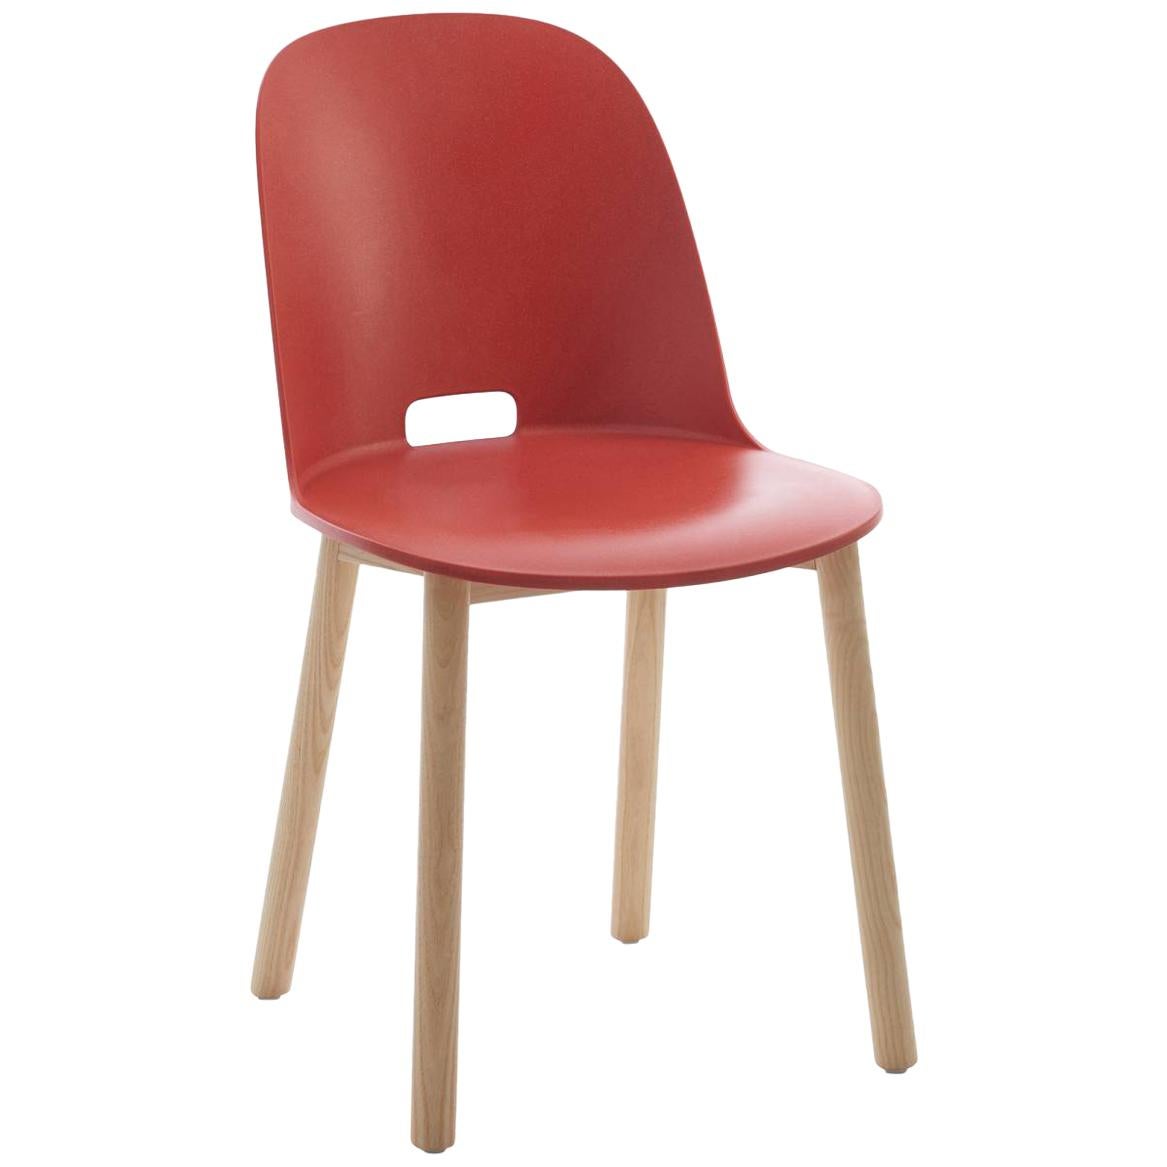 Emeco Alfi Chair in Red and Ash with High Back by Jasper Morrison For Sale